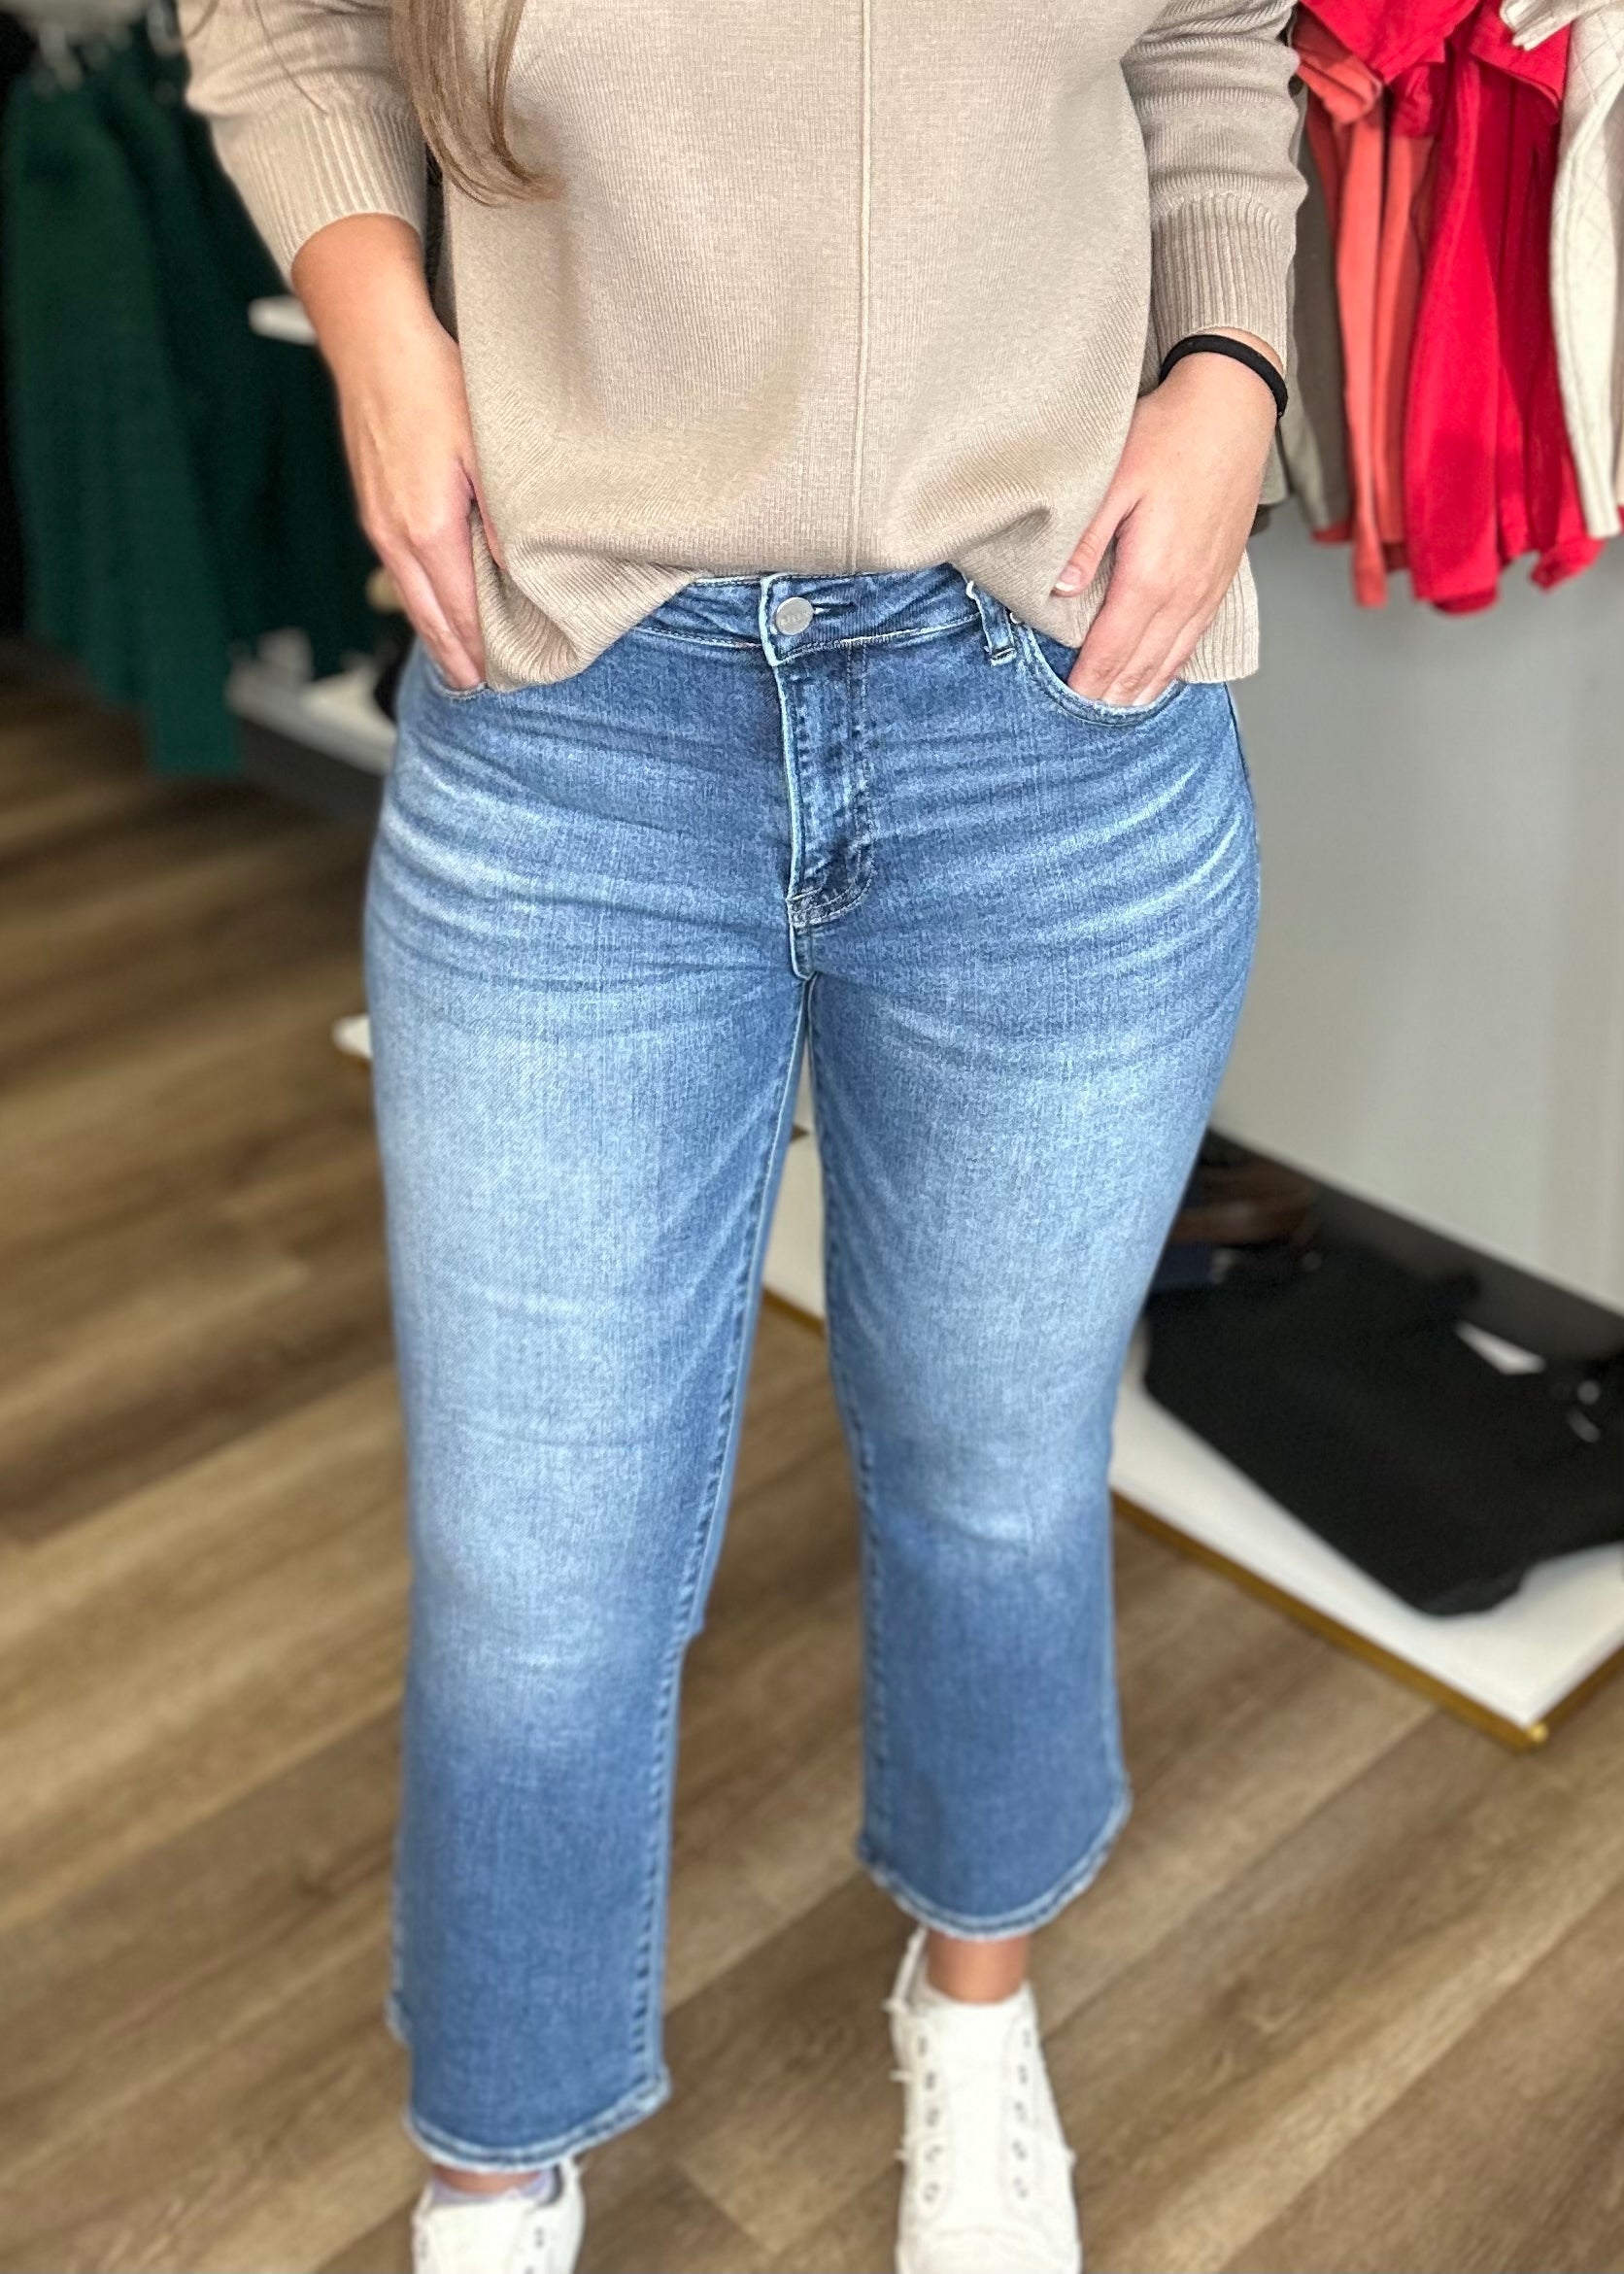 Risen Mid Rise Cropped Flare Jeans